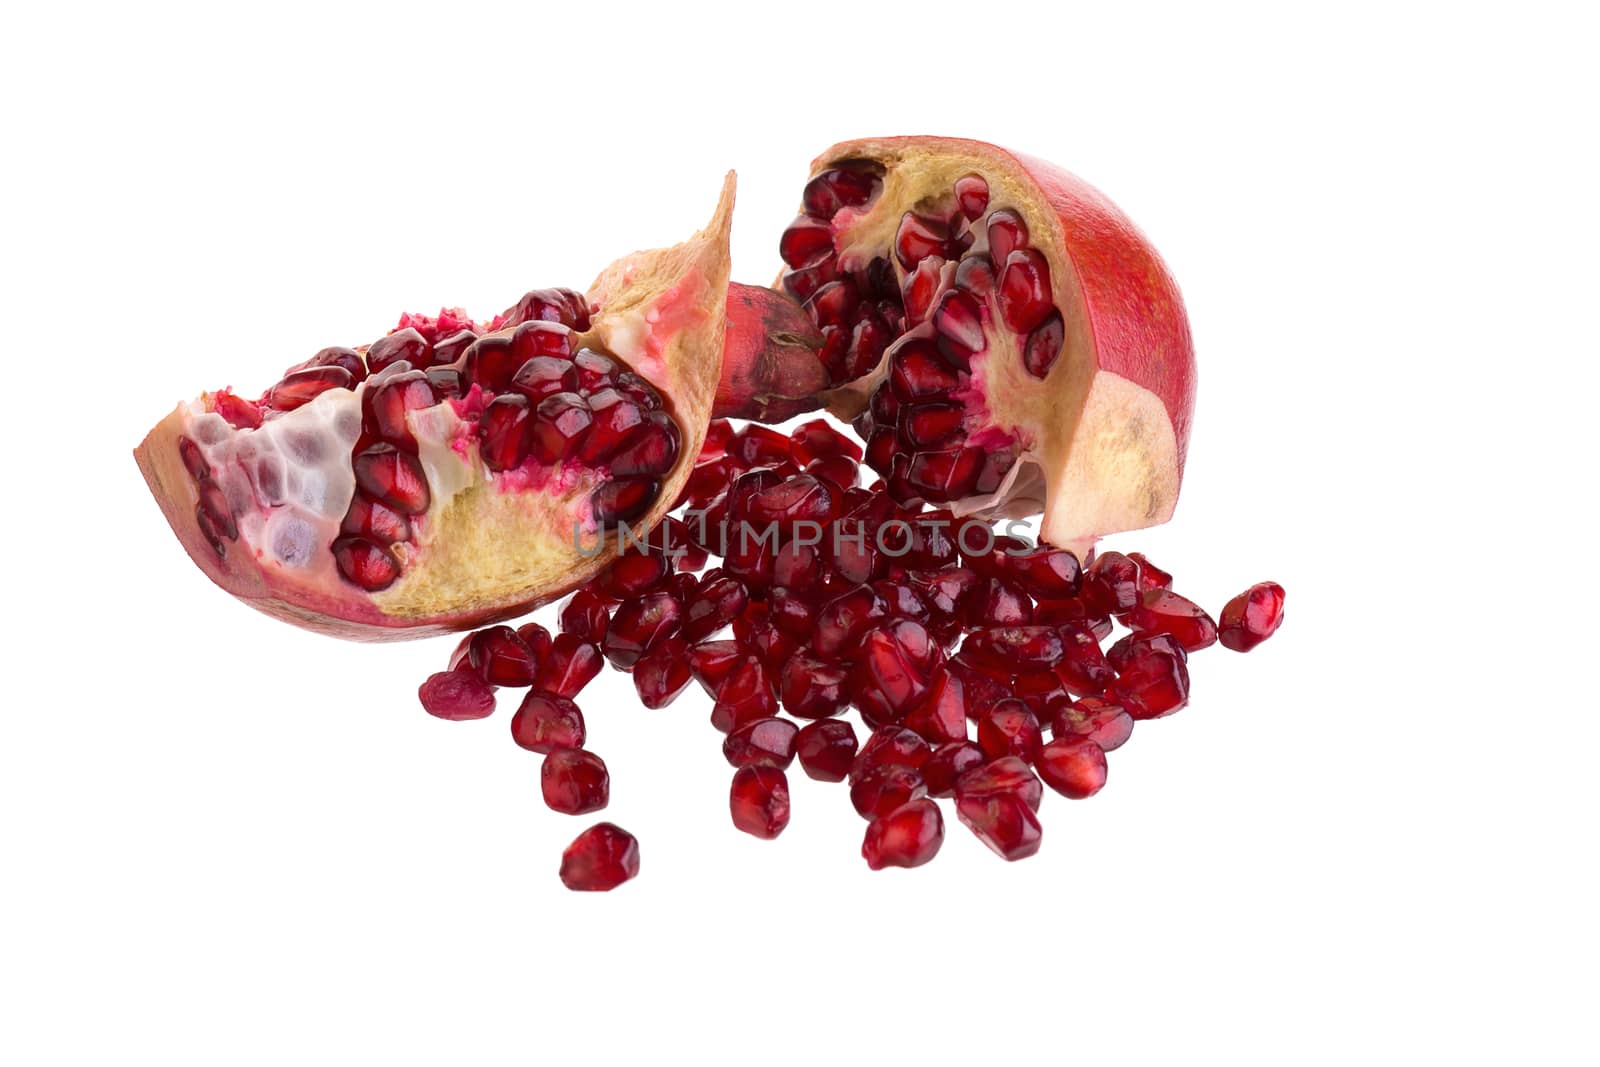 Pomegranate isolated on a white background.